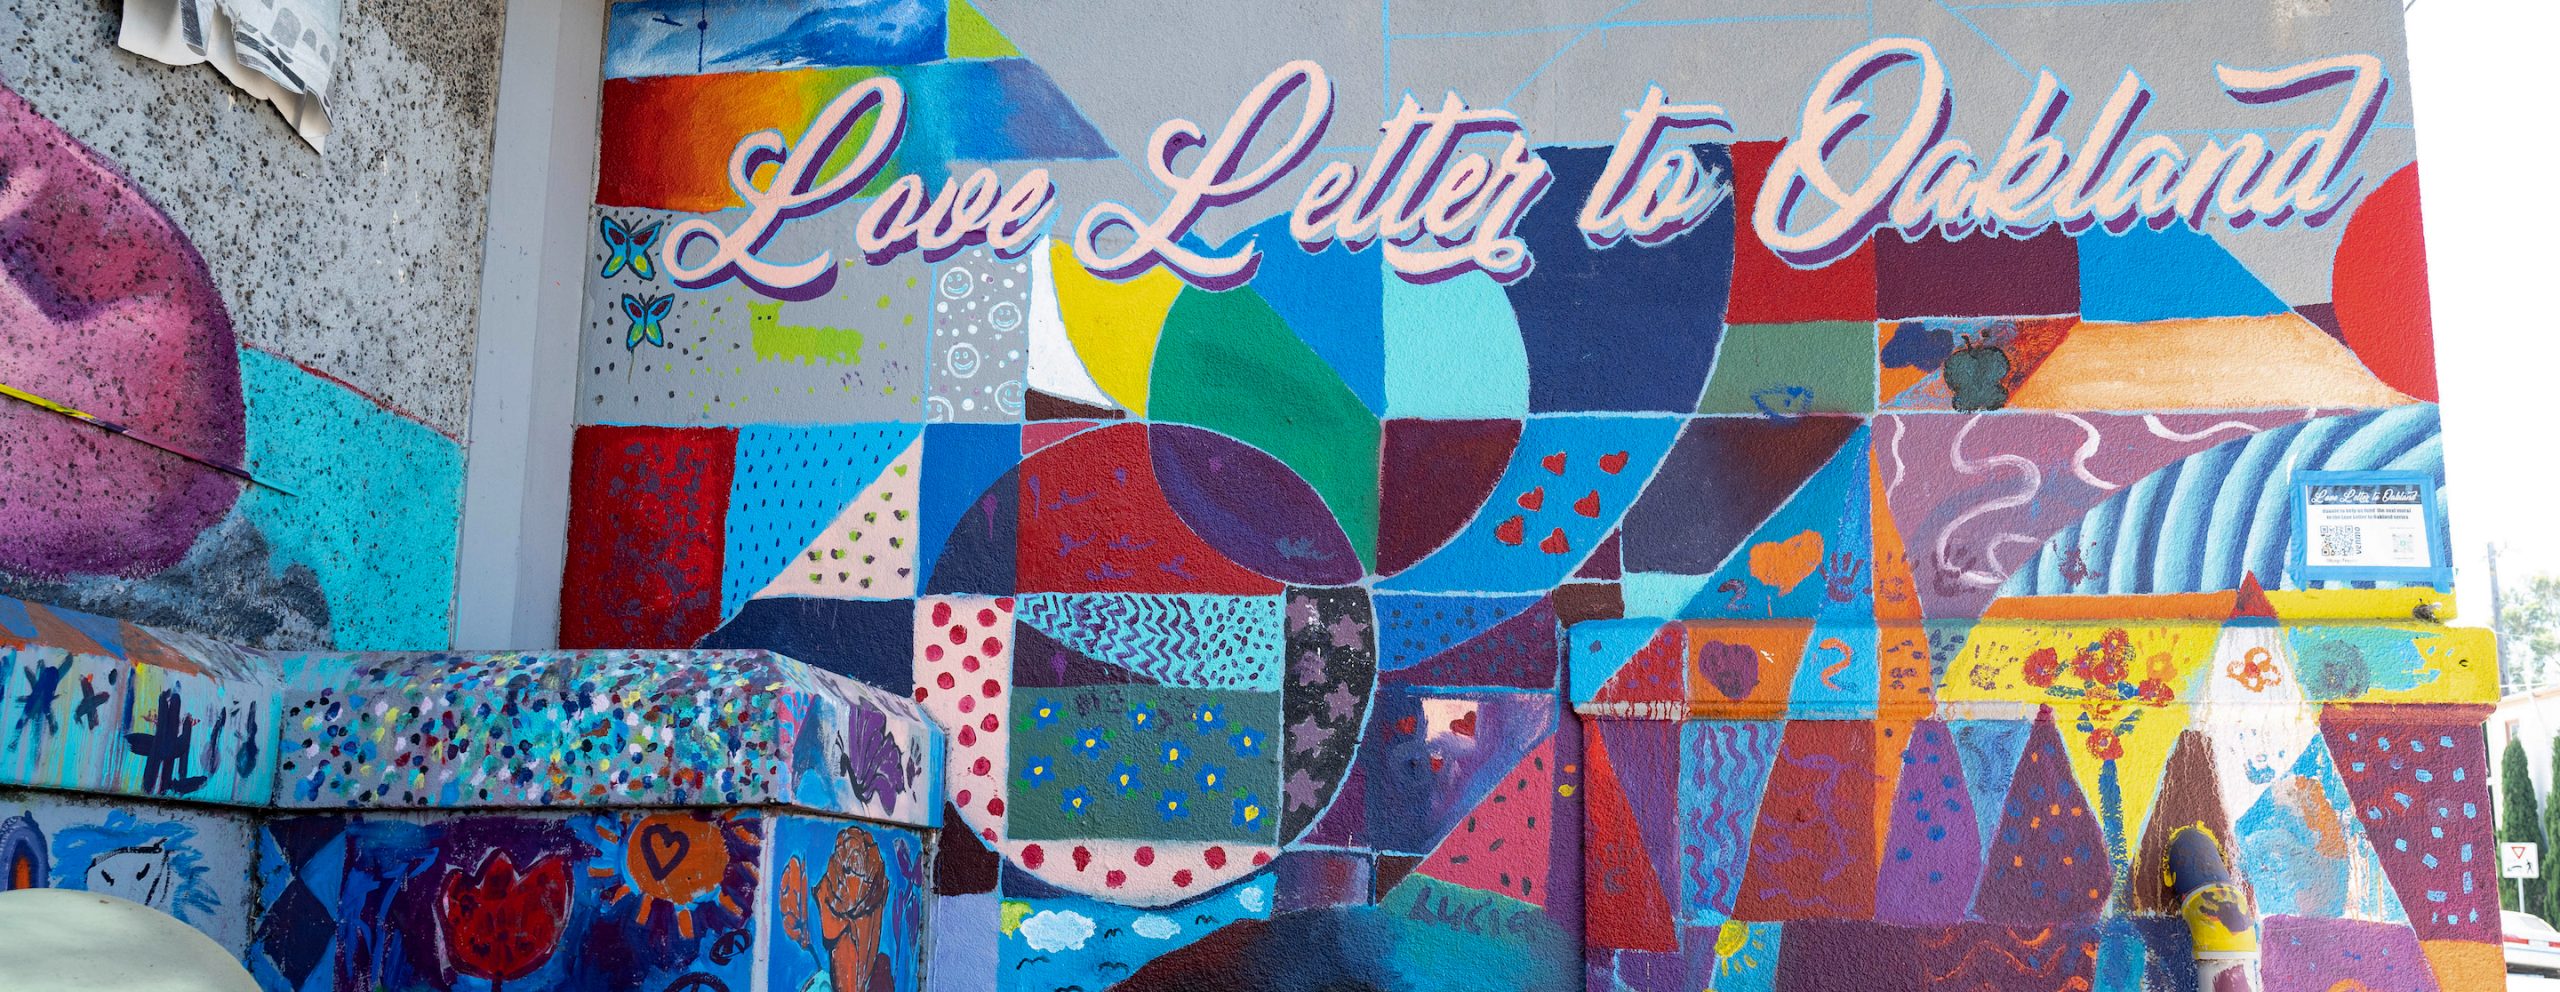 mural reading "A Love Letter to Oakland"